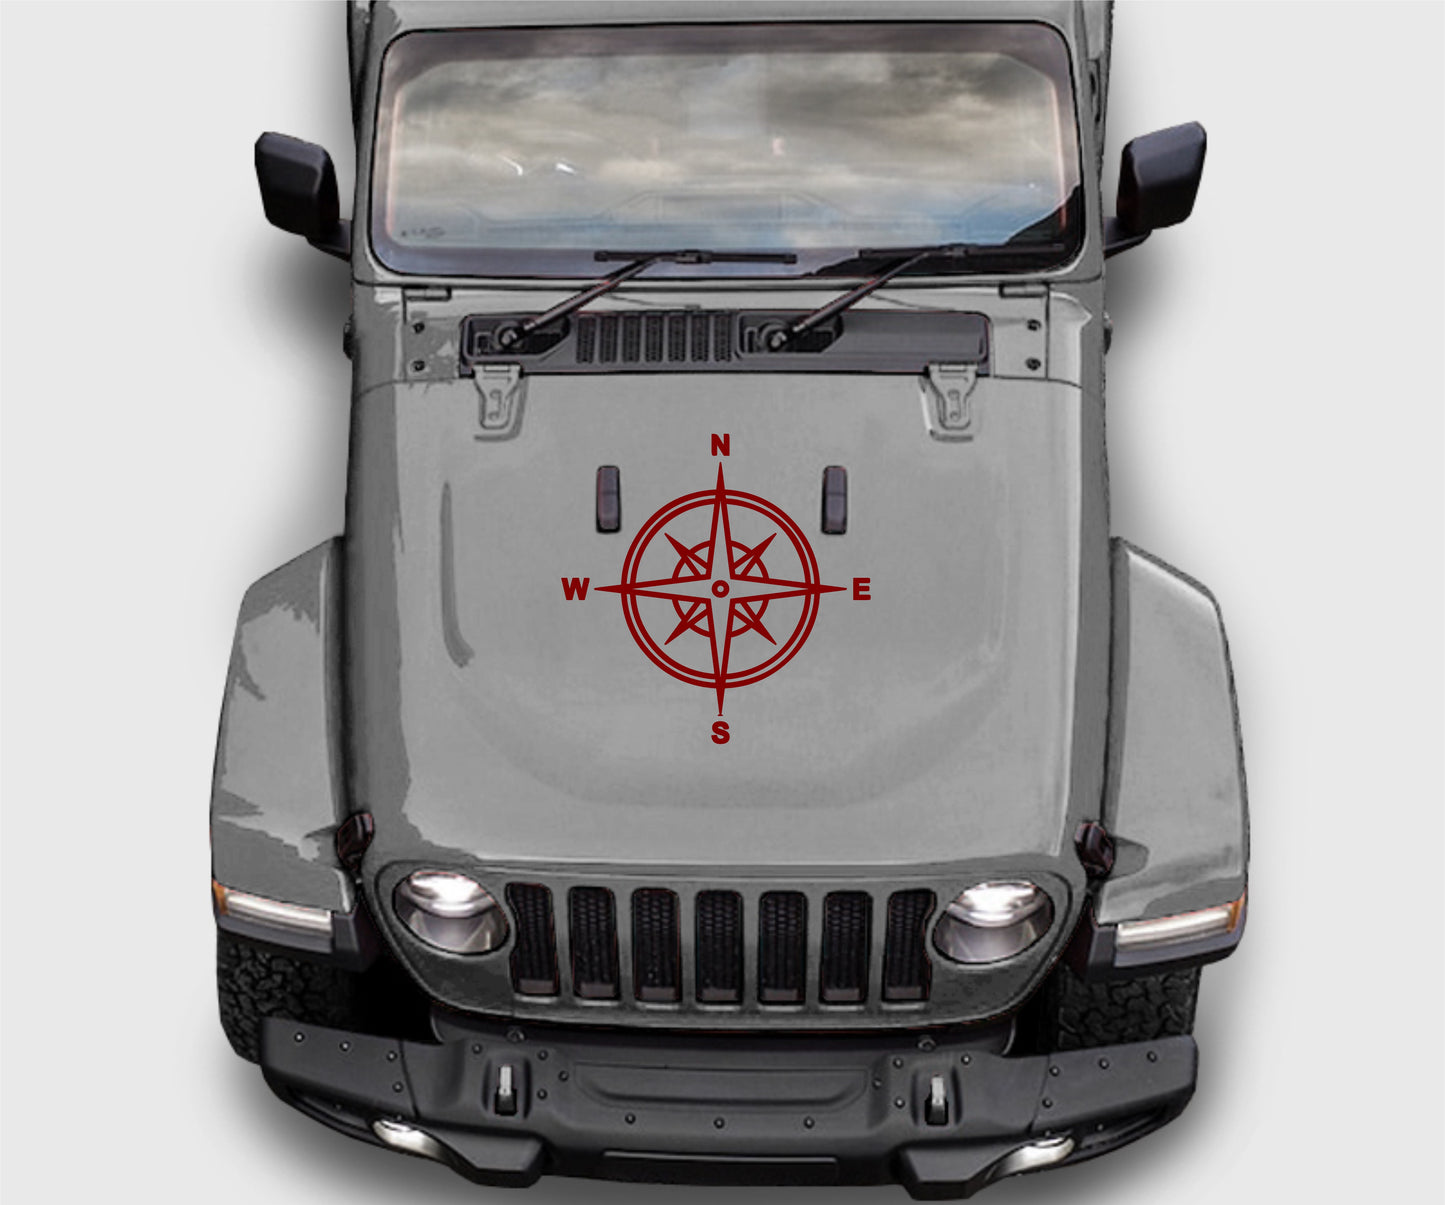 Compass Hood Decal Sticker for Jeeps, Trucks, Cars... Sizes Available.